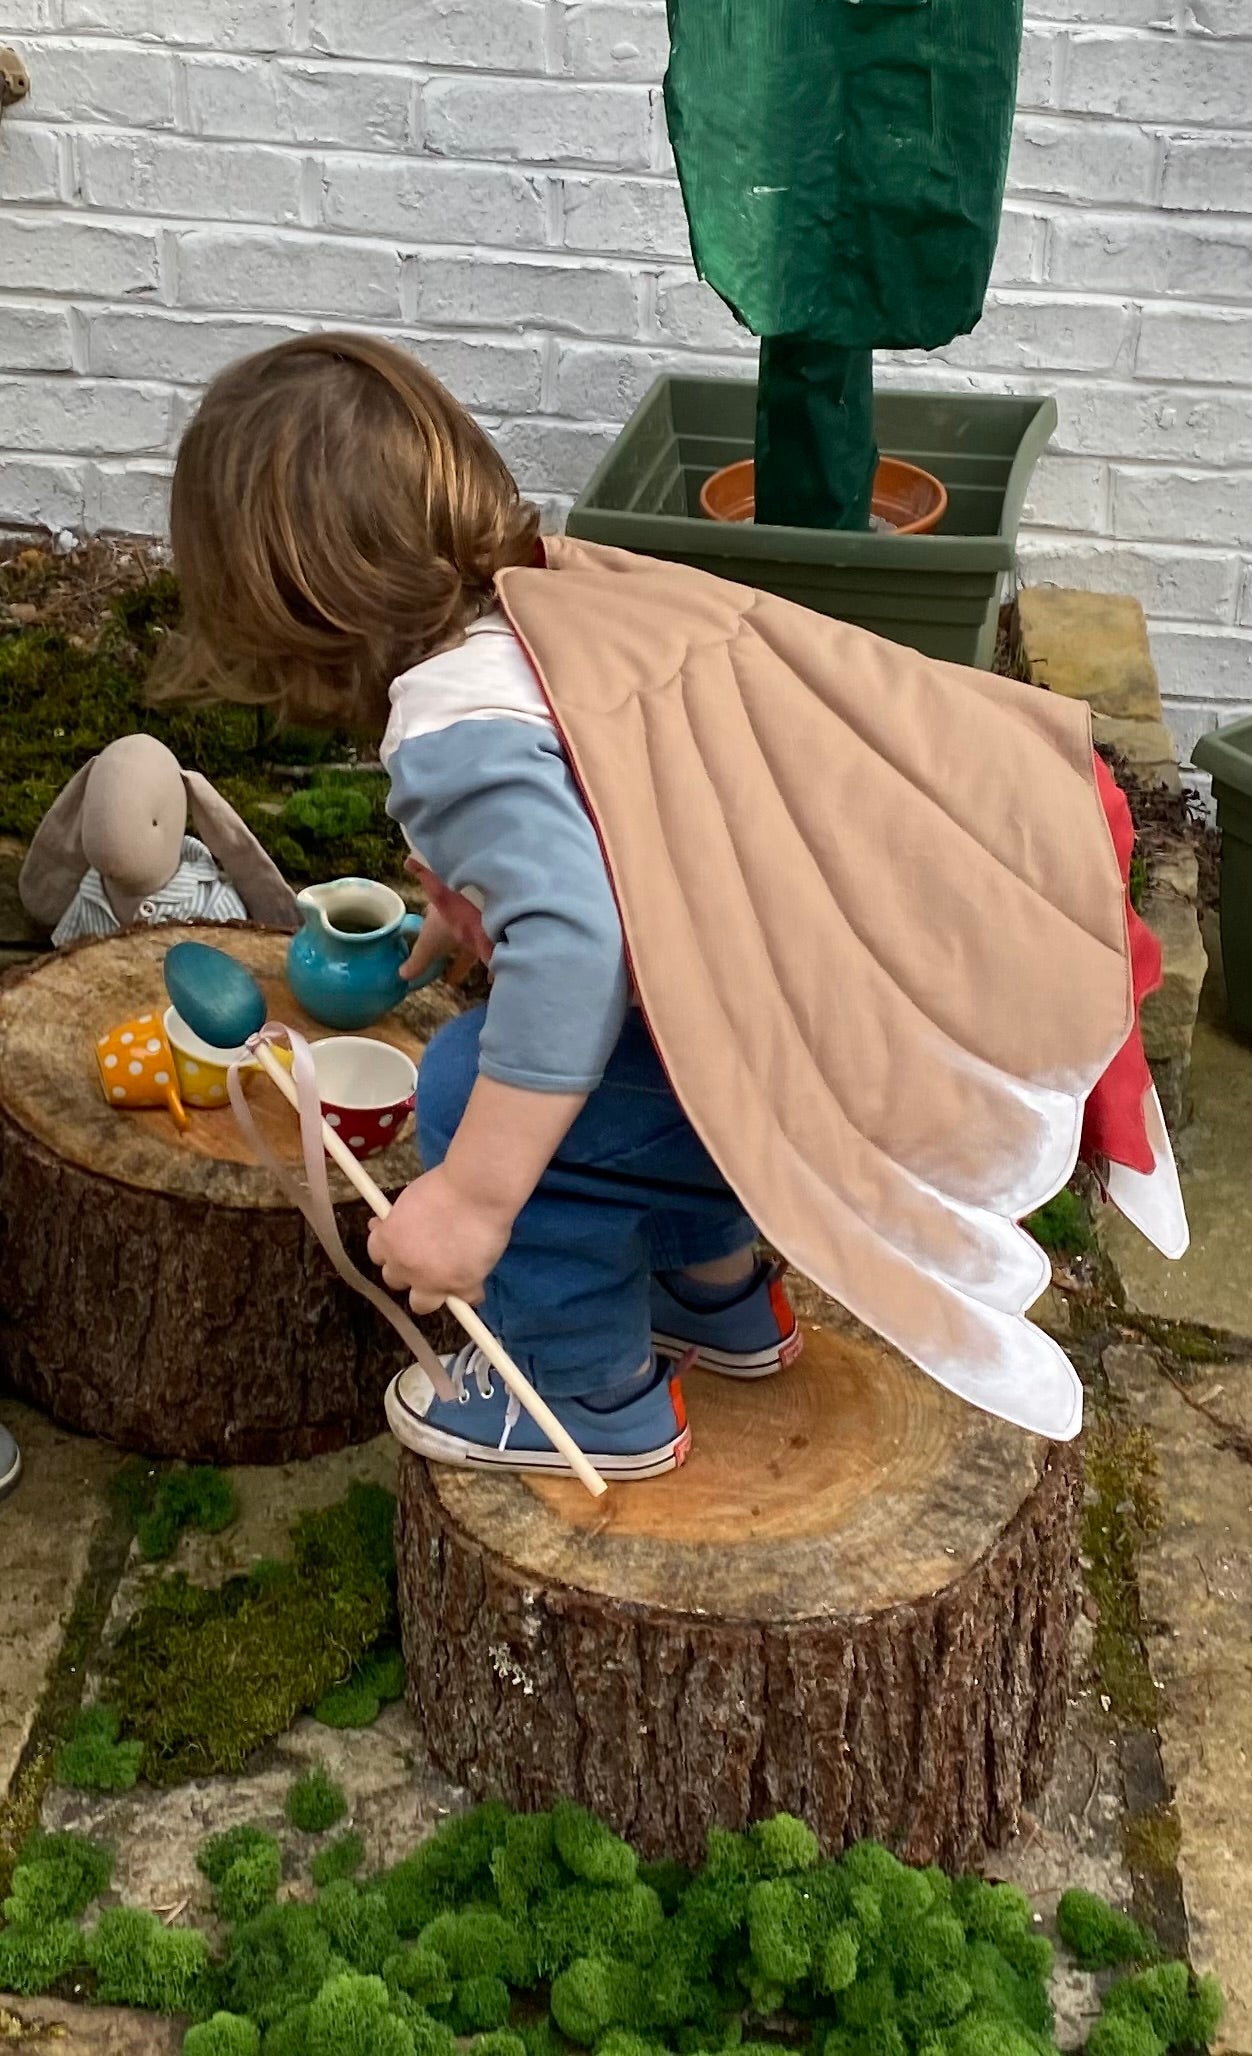 Child playing pretend with bird dress up wings.